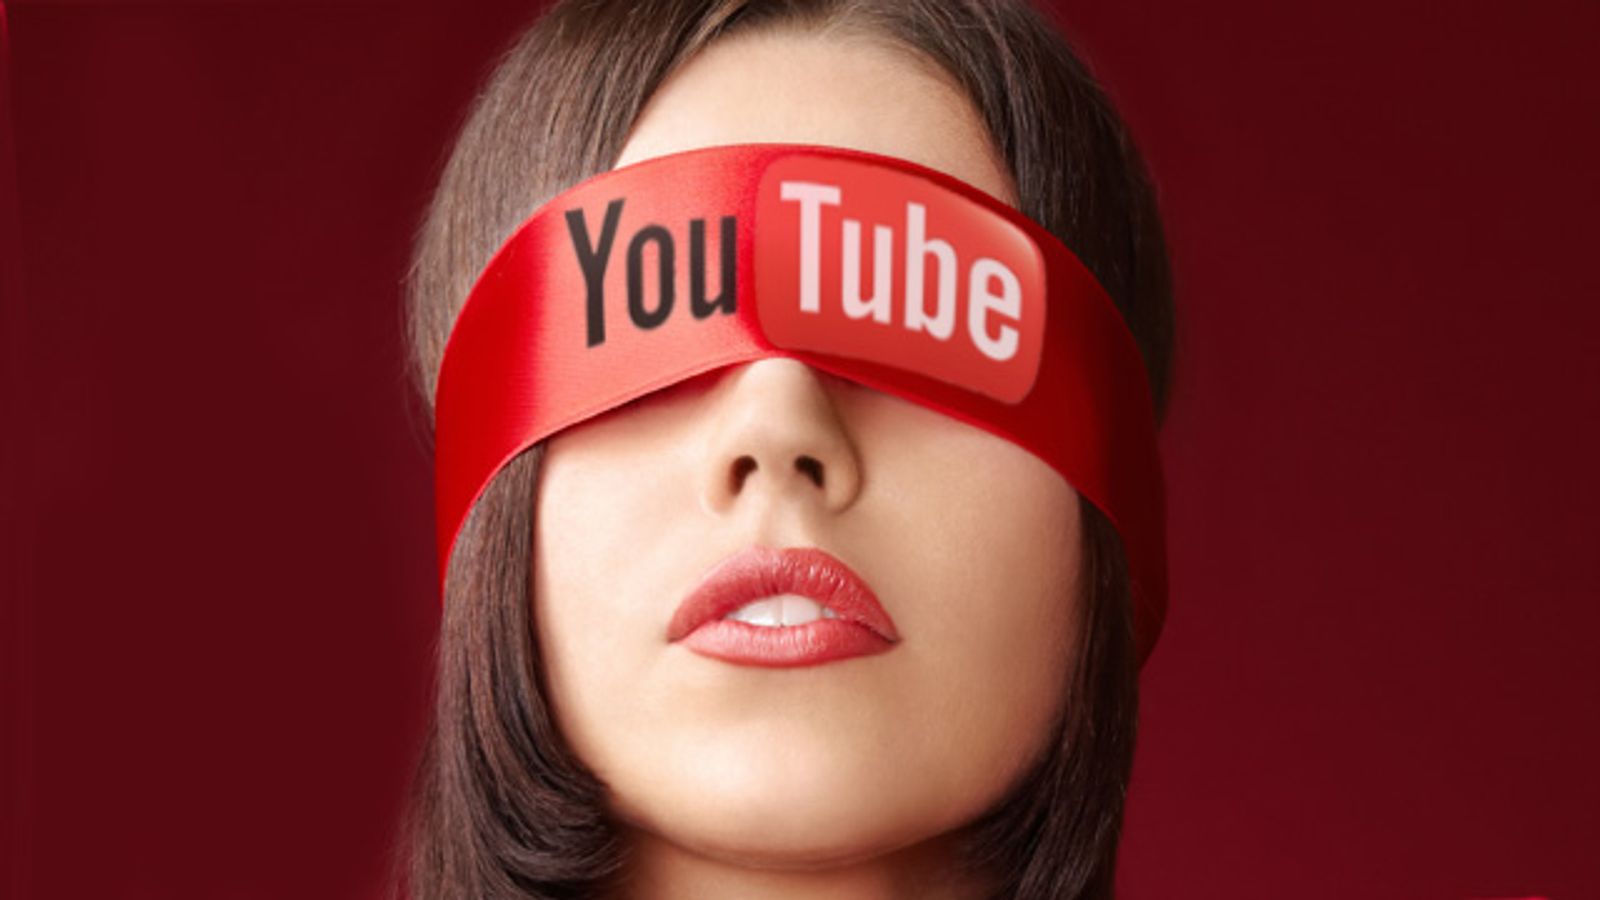 YouTube Adds 'Safety Mode'